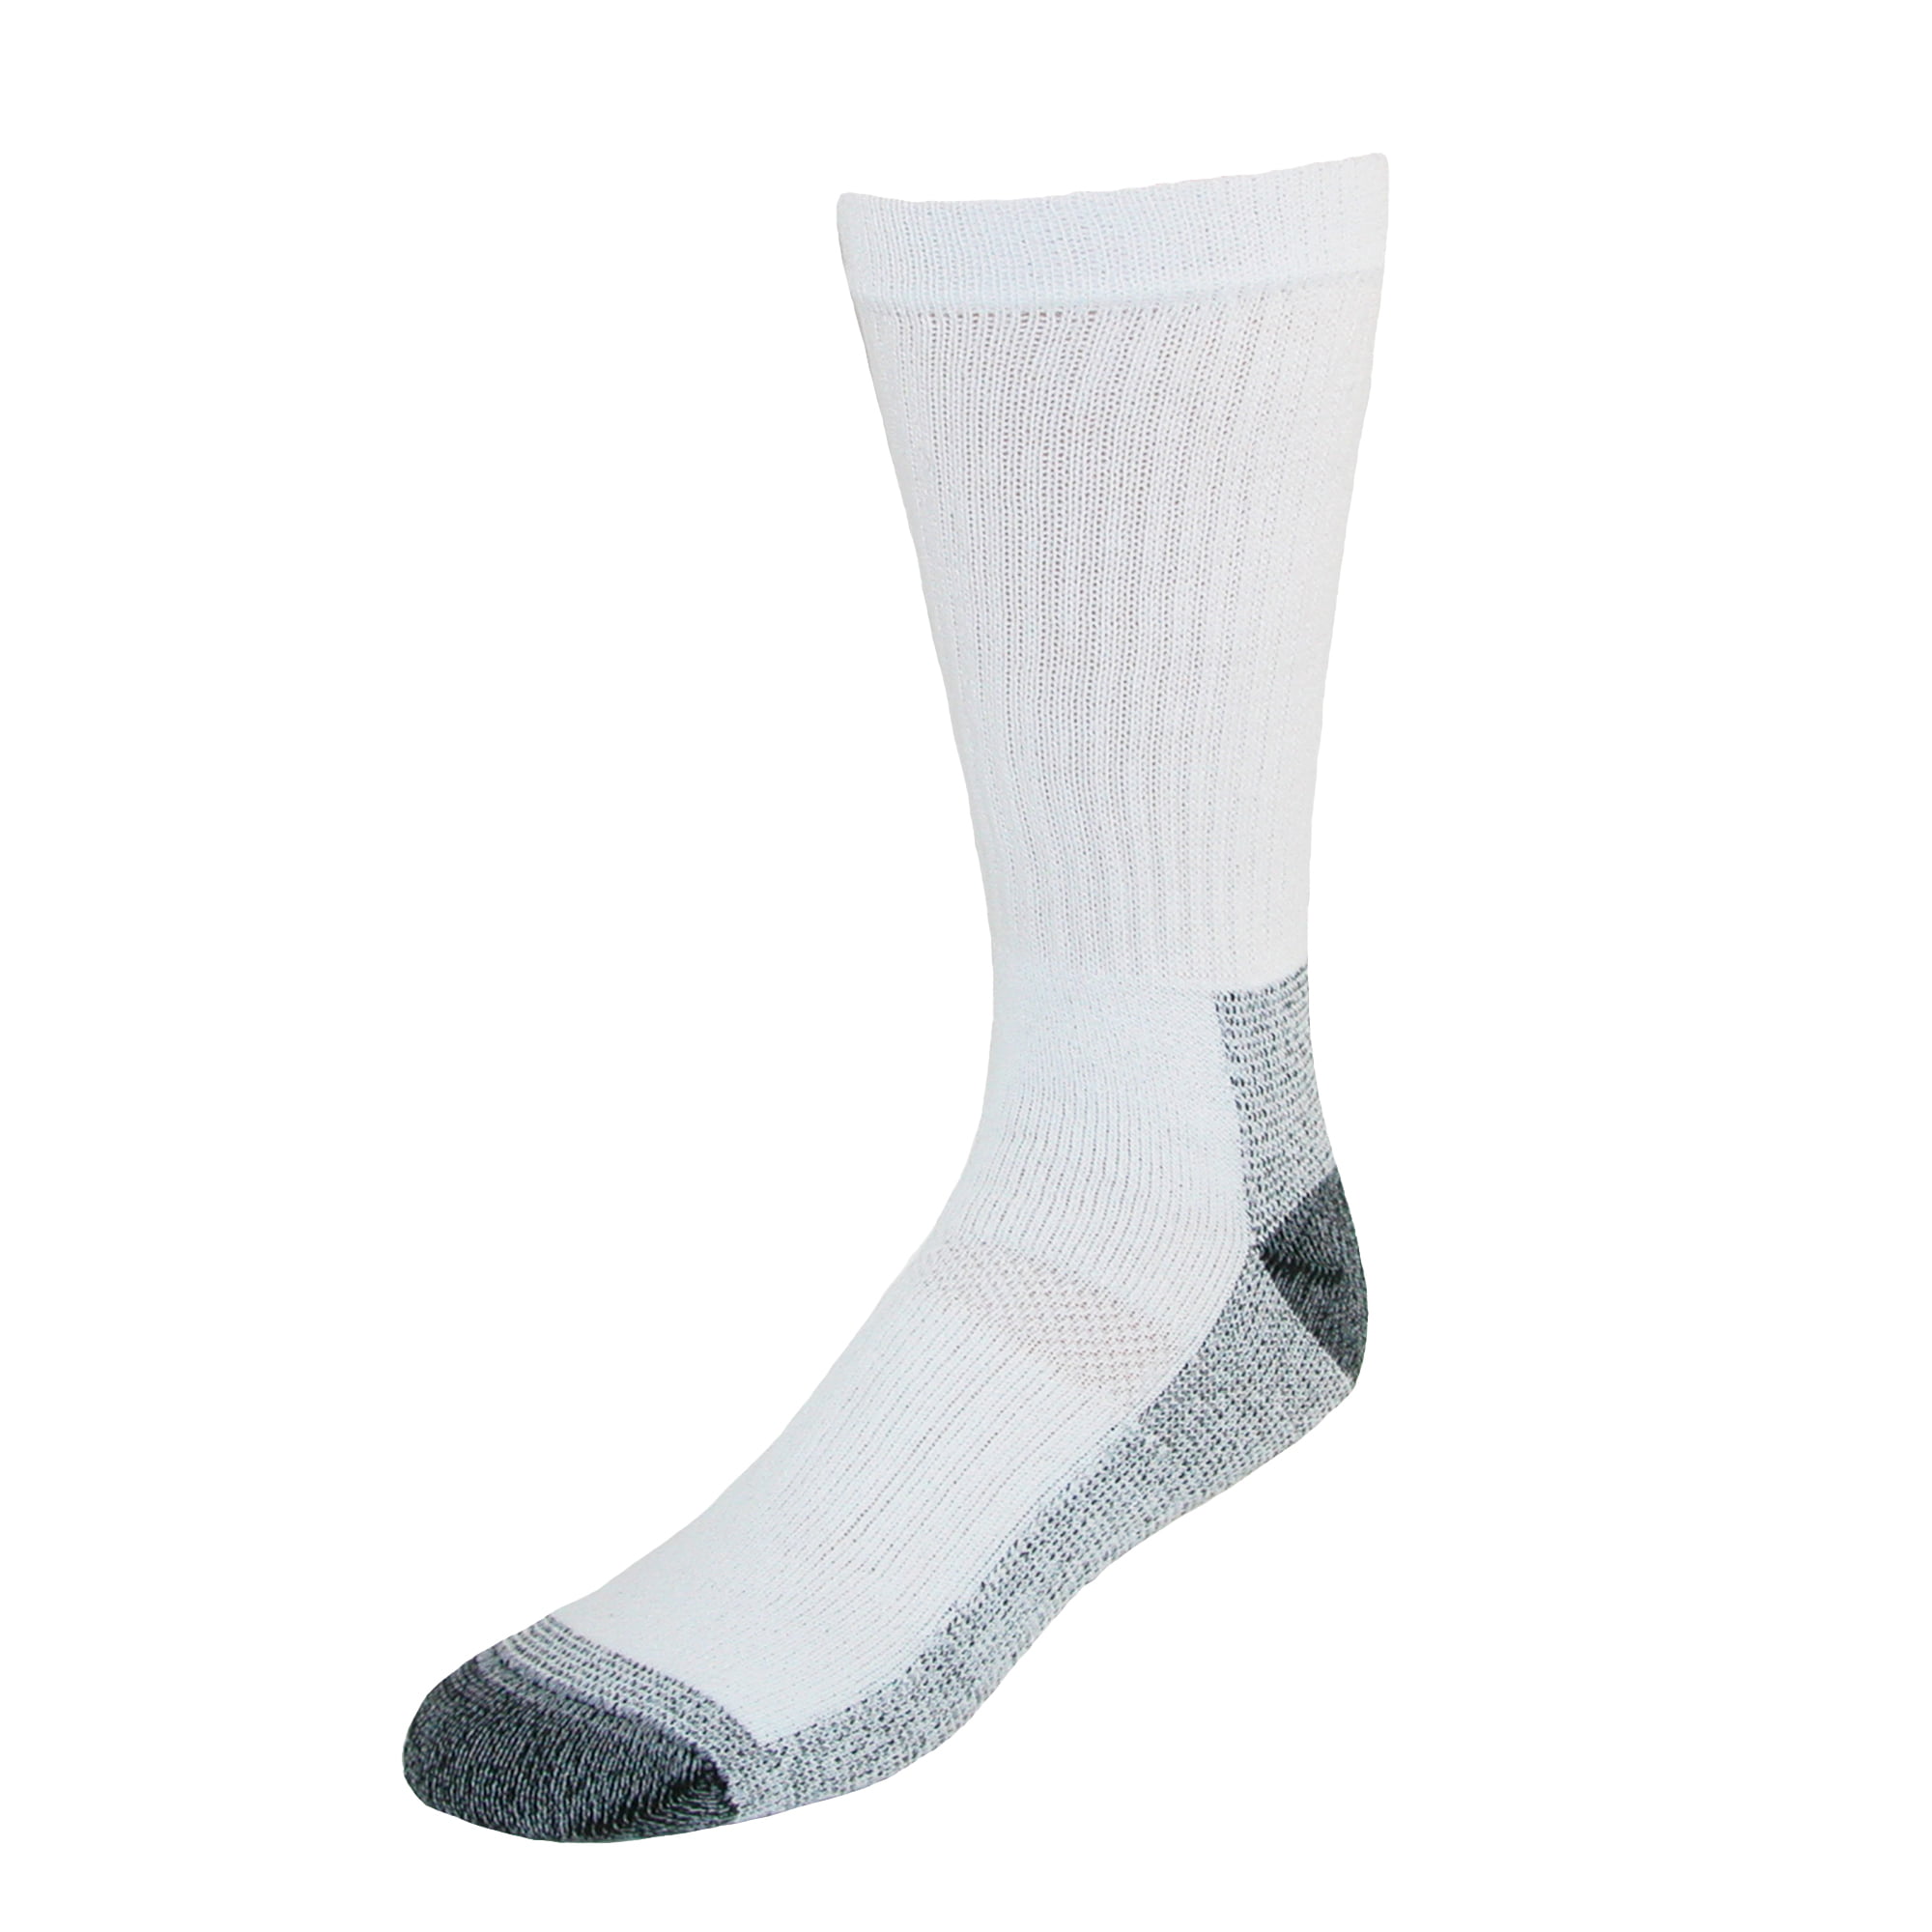 6 Day Tall Workout Socks for Push Pull Legs